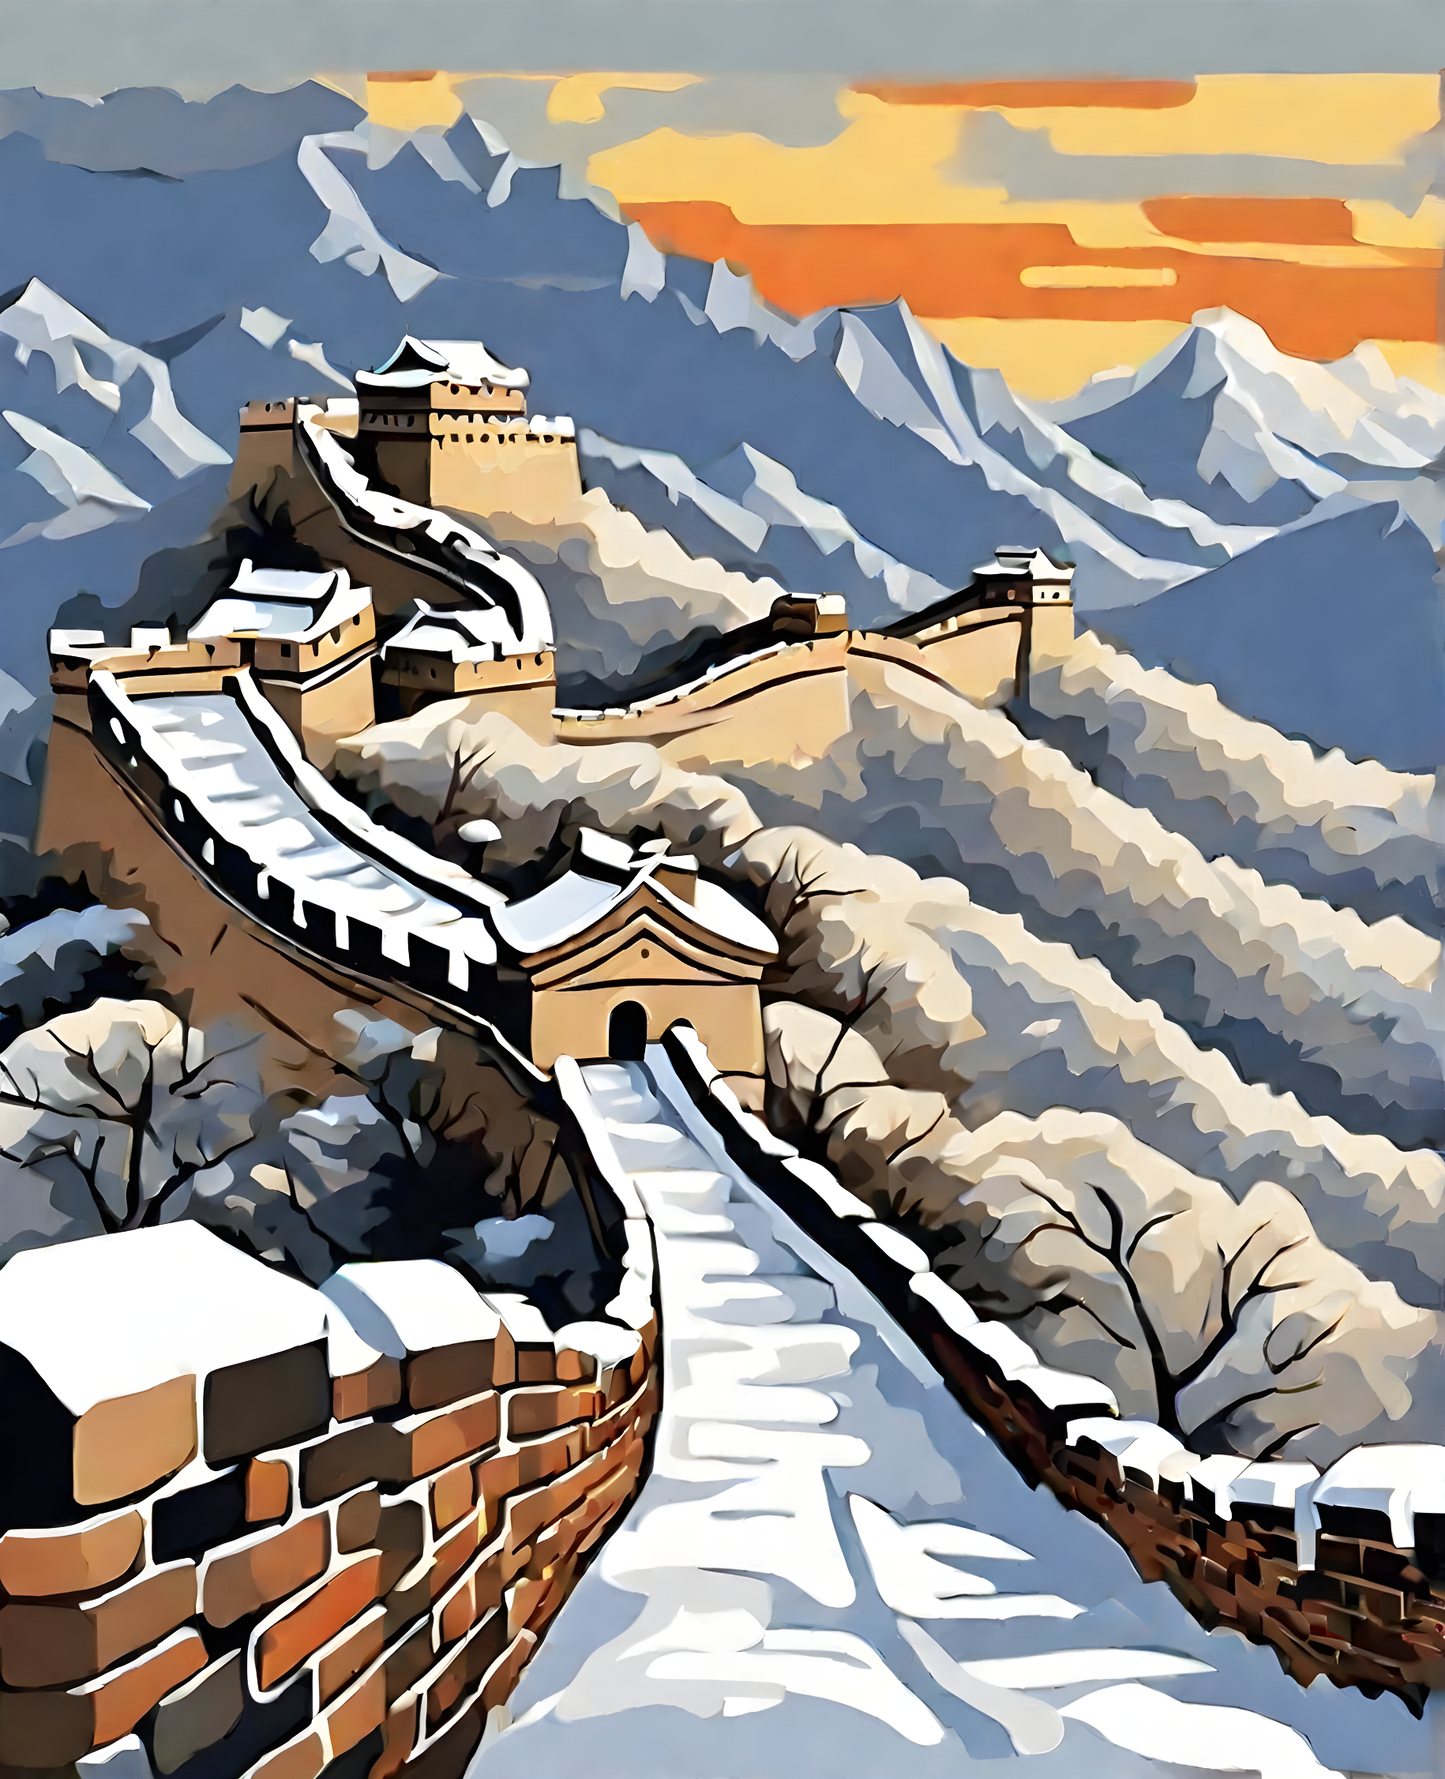 China Collection PD (7) - Great Wall of China - Van-Go Paint-By-Number Kit